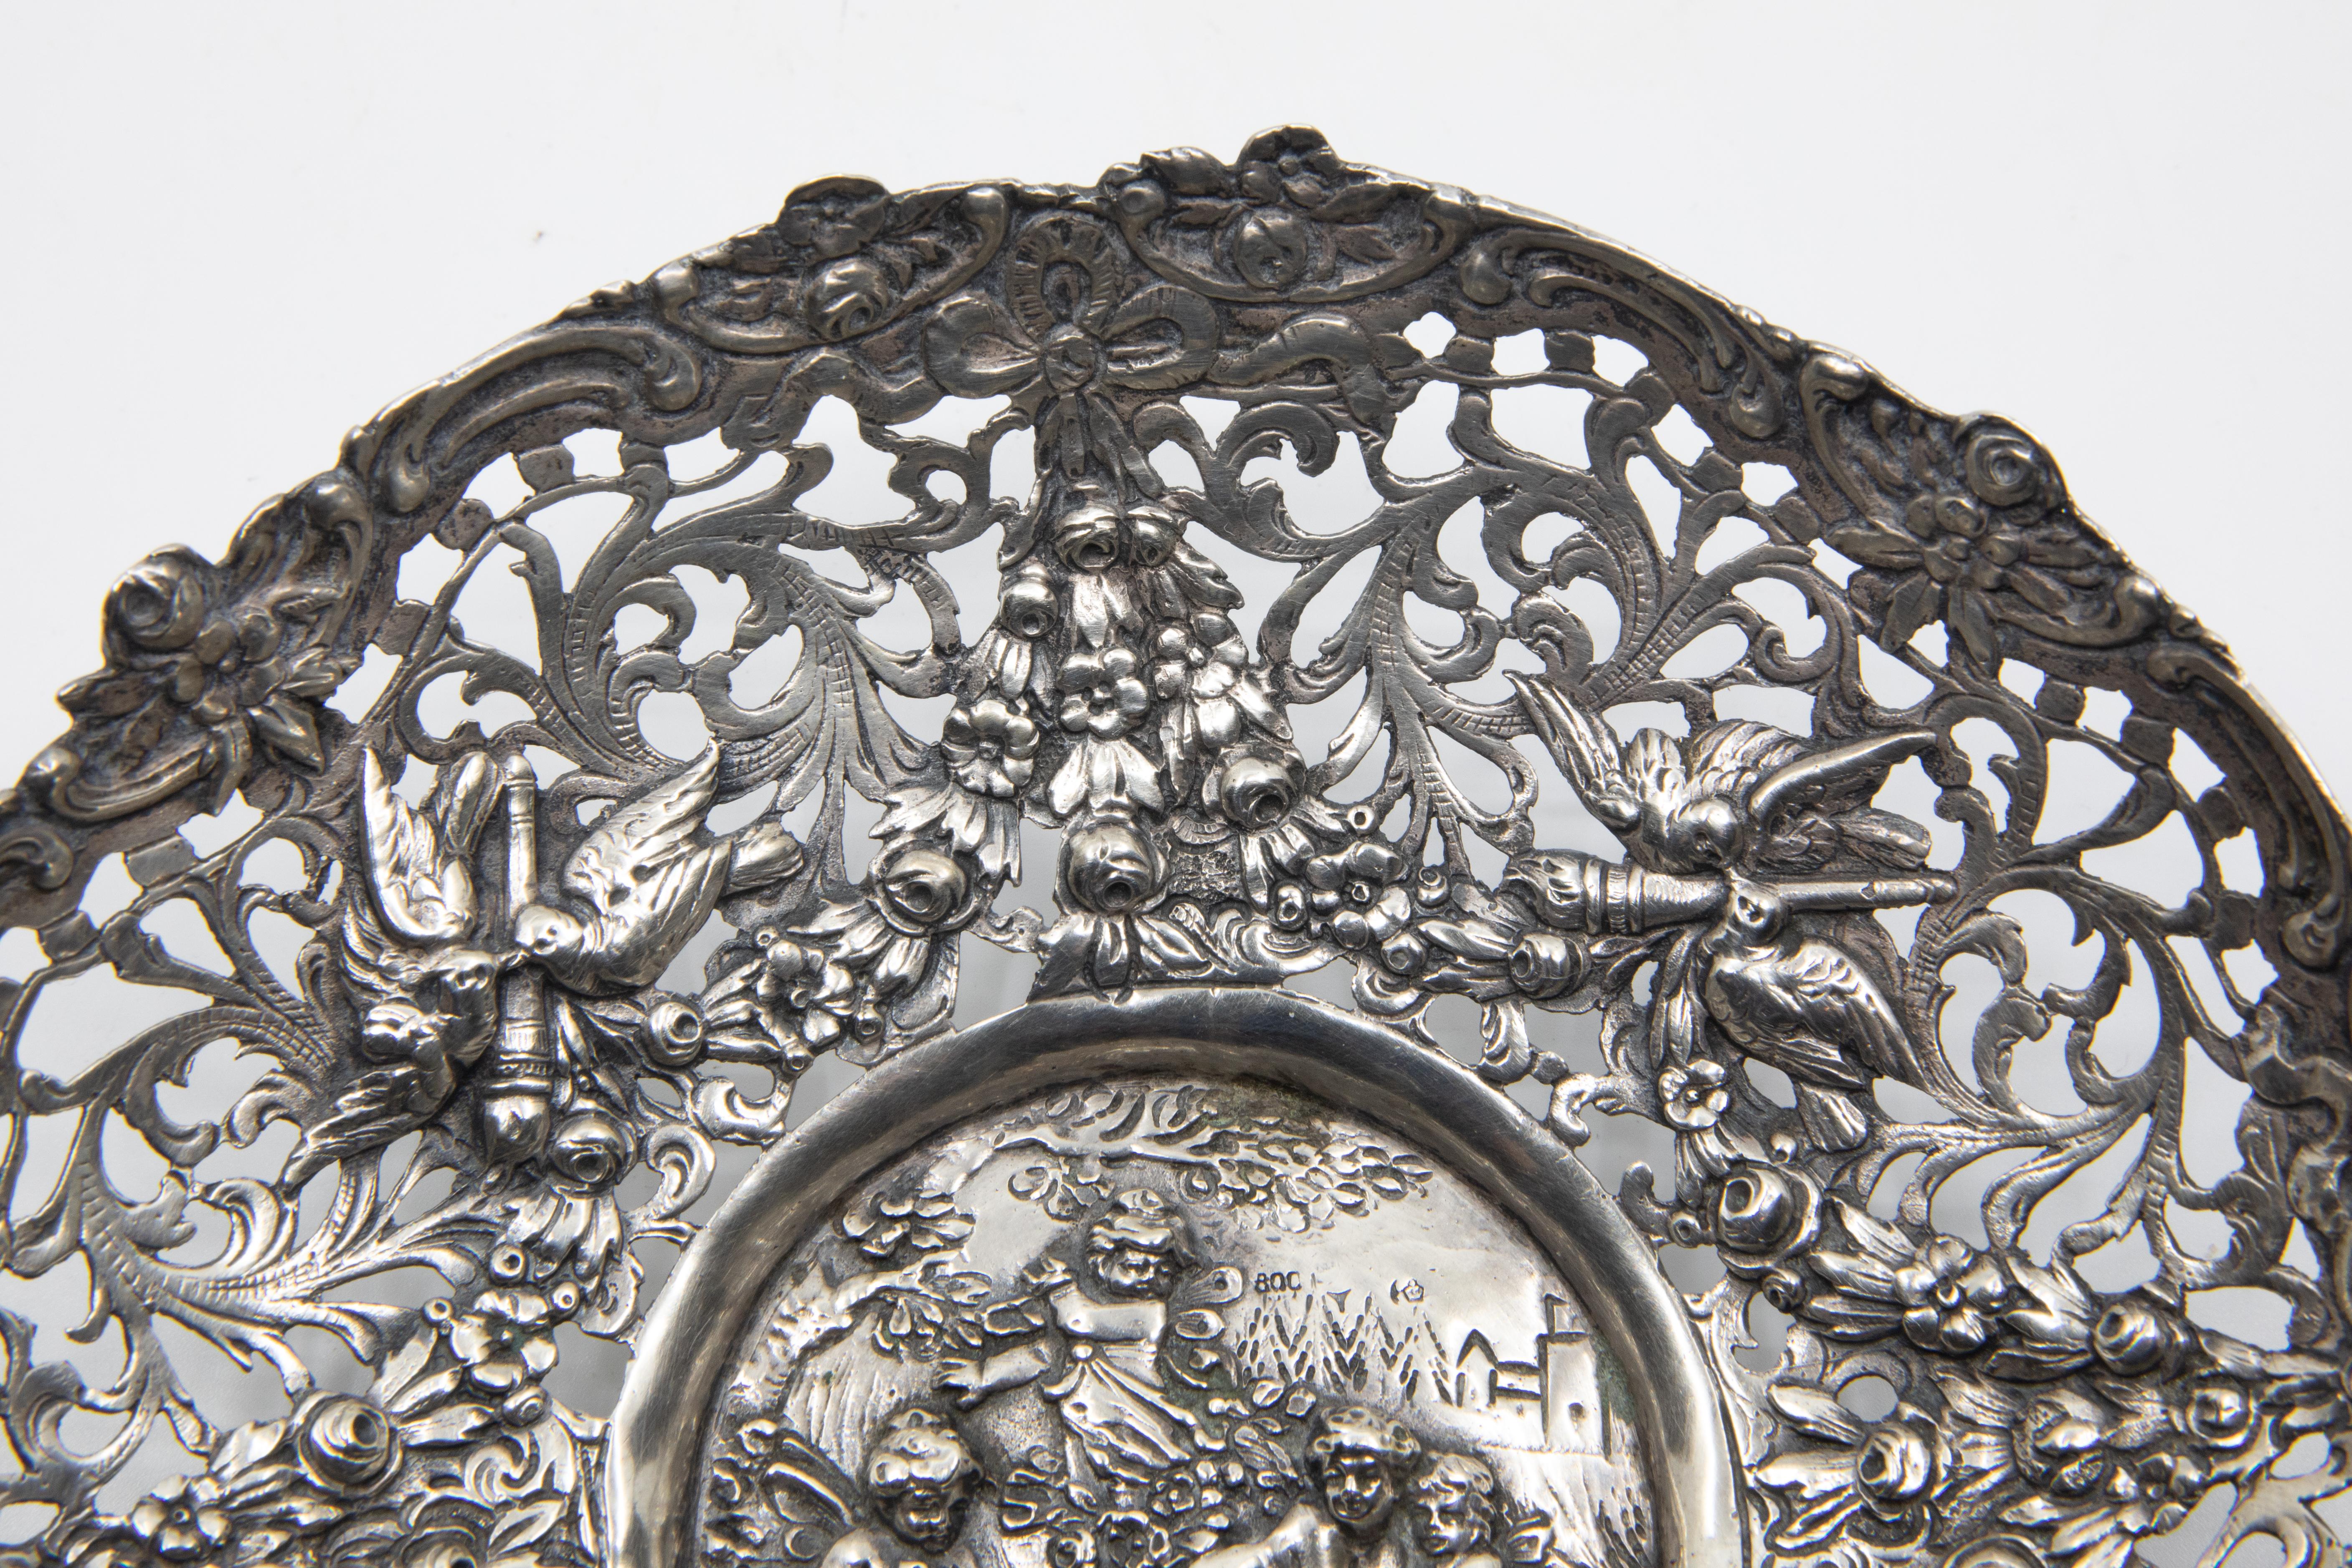 Antique 800 German silver repoussed dish. The dish has a Baroque design depicting frolicking cupids and doves with floral motifs.